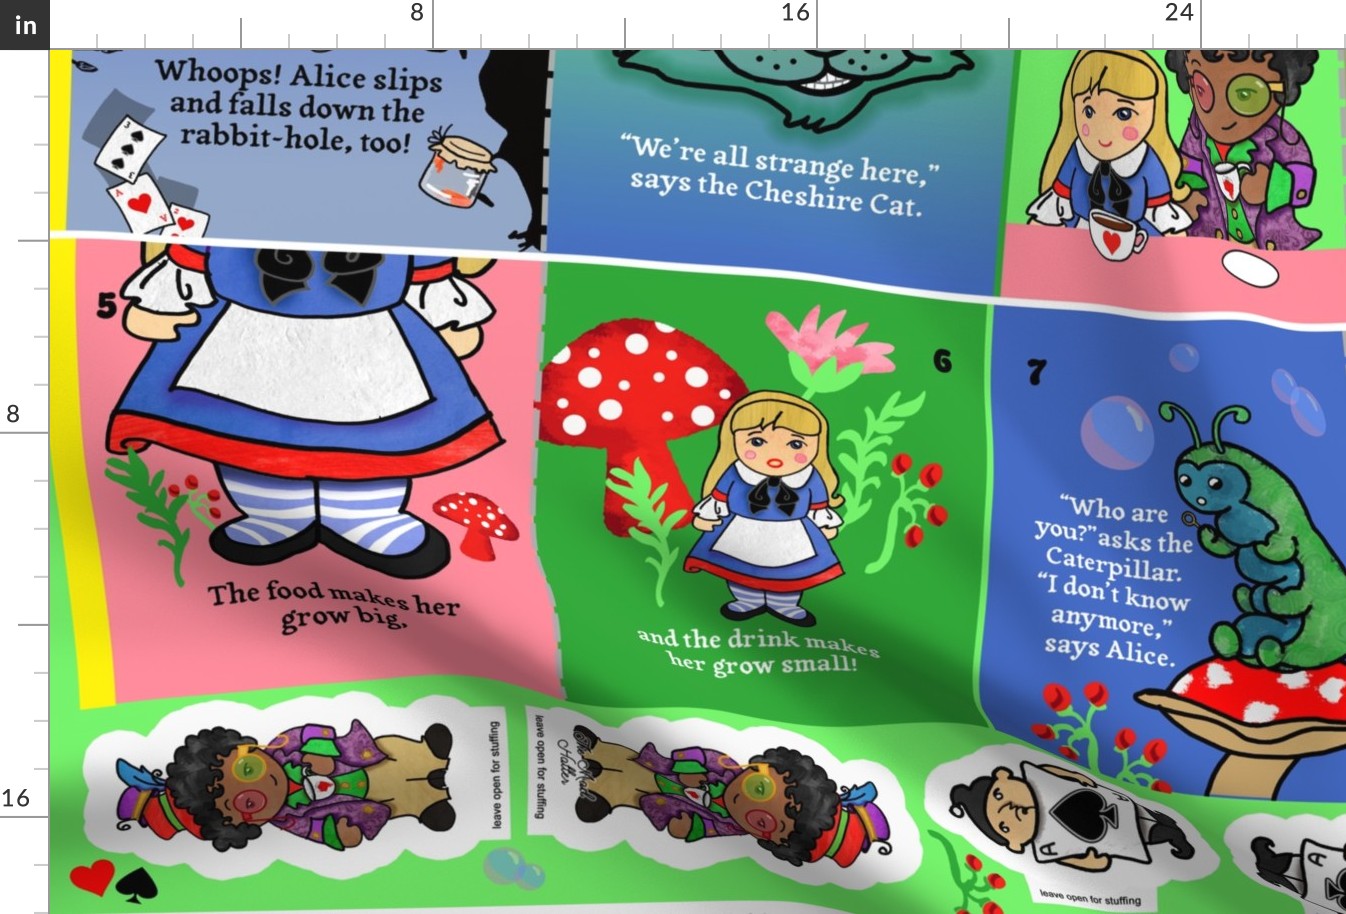 Alice's Adventures in Wonderland large book and doll characters set 54 x 36 inches